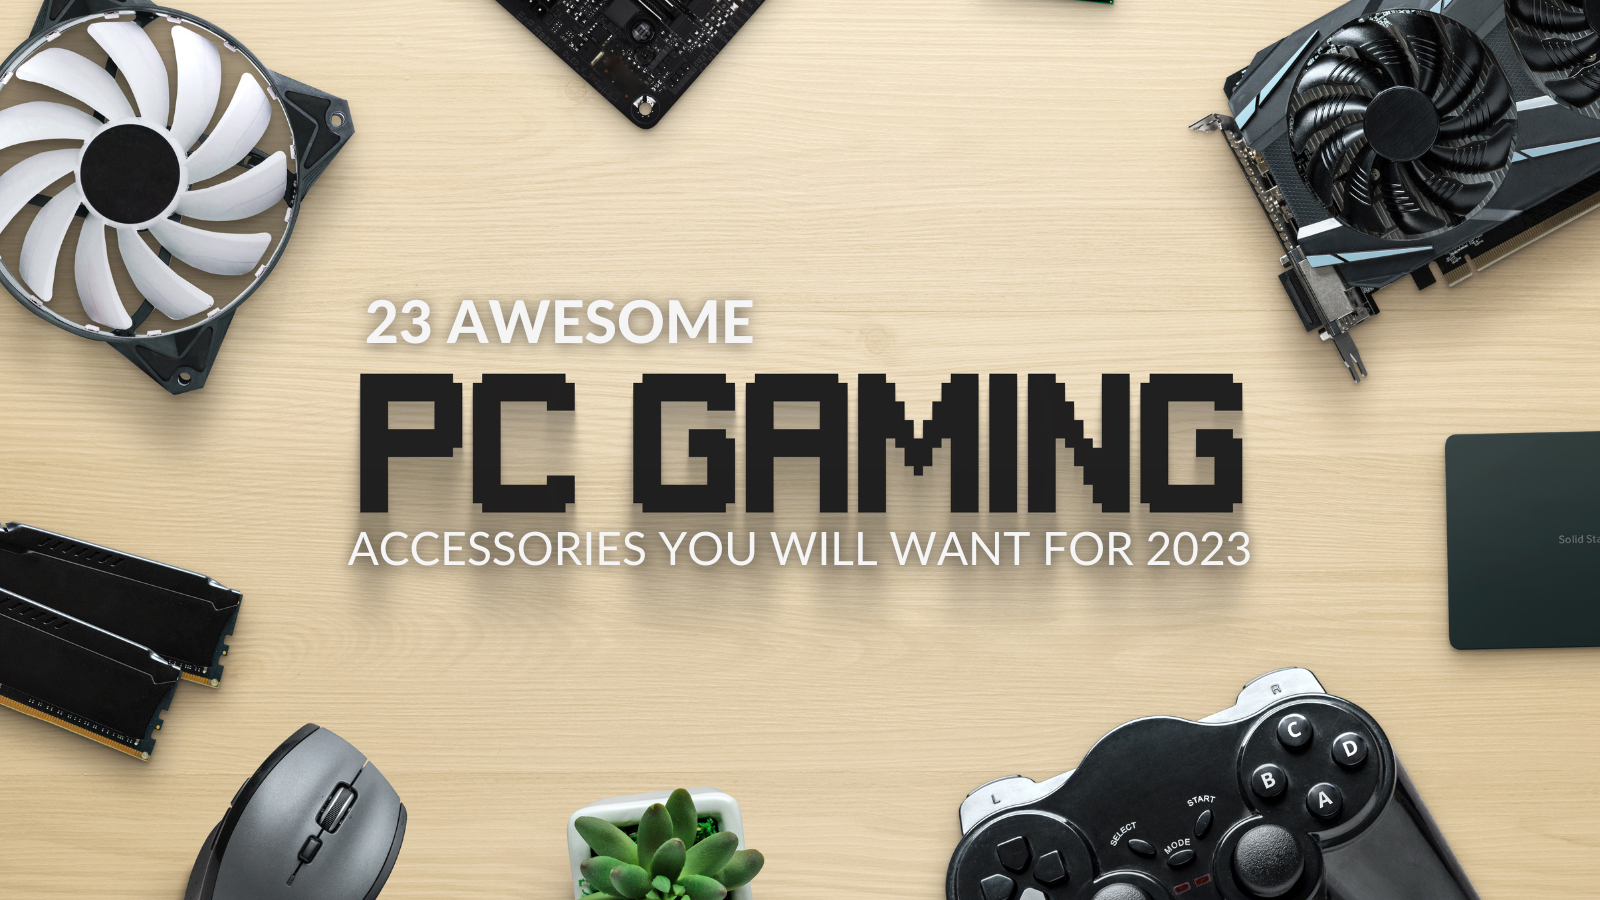 https://www.overclockers.co.uk/blog/wp-content/uploads/2023/08/23-PC-Gaming-Accessories-Updated.png